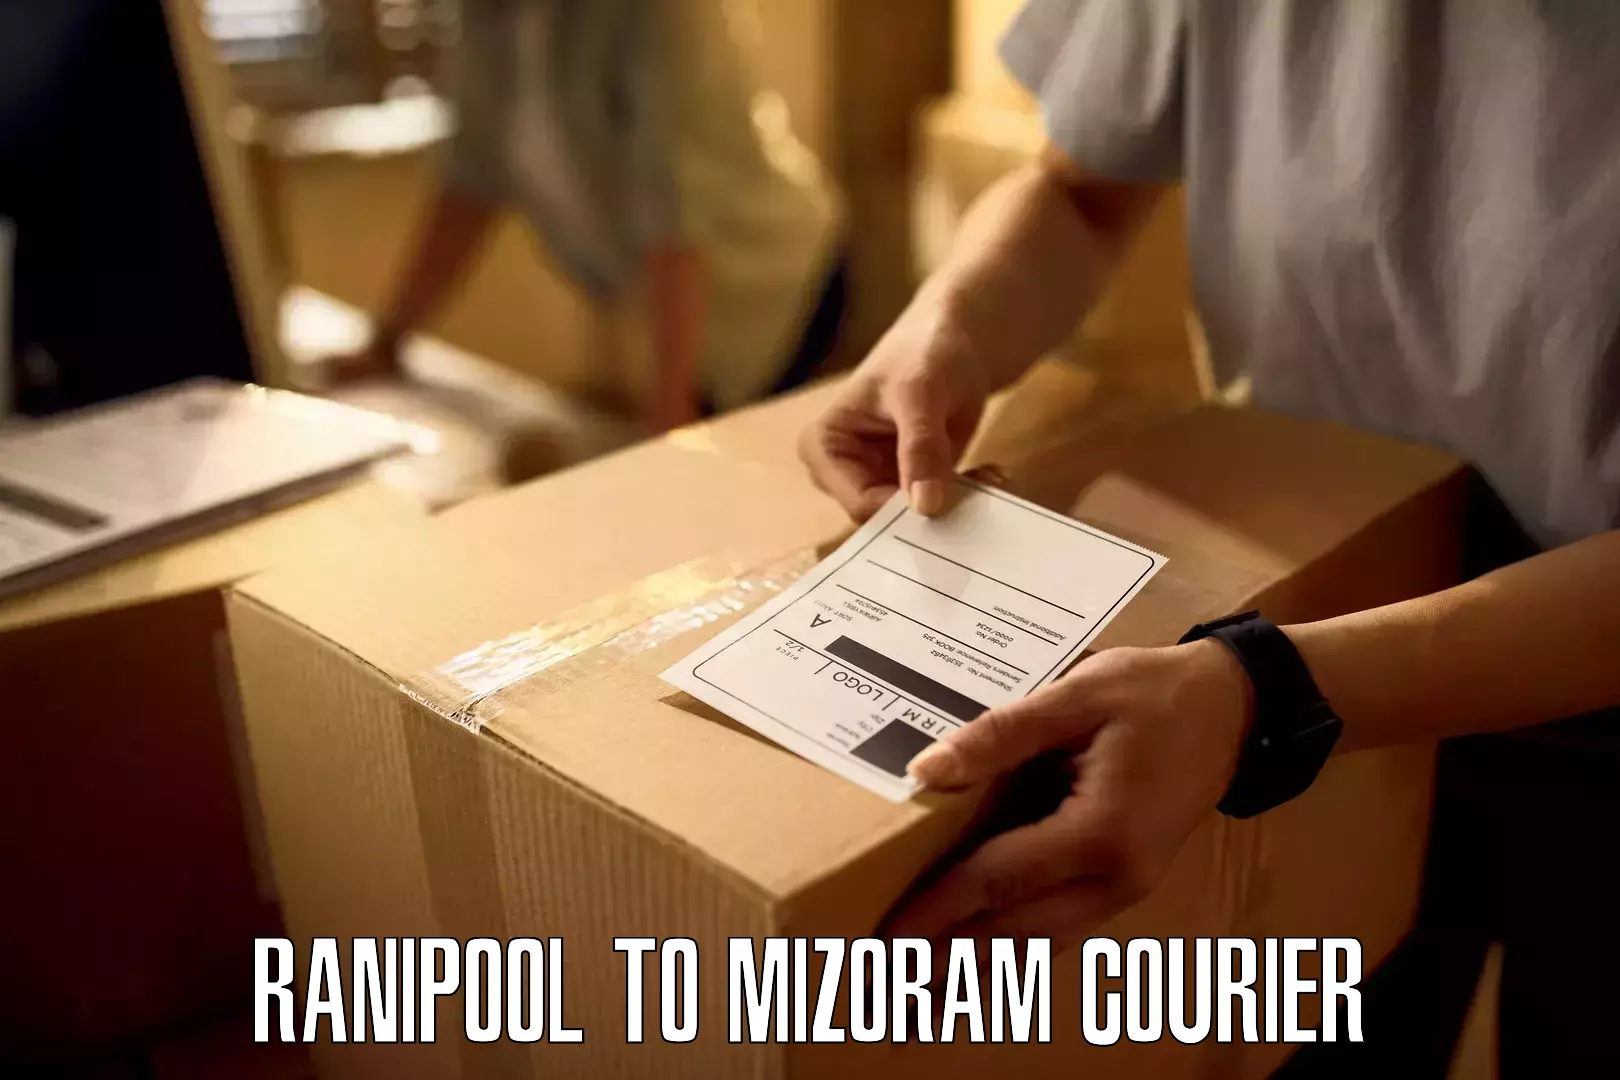 24/7 courier service in Ranipool to Darlawn